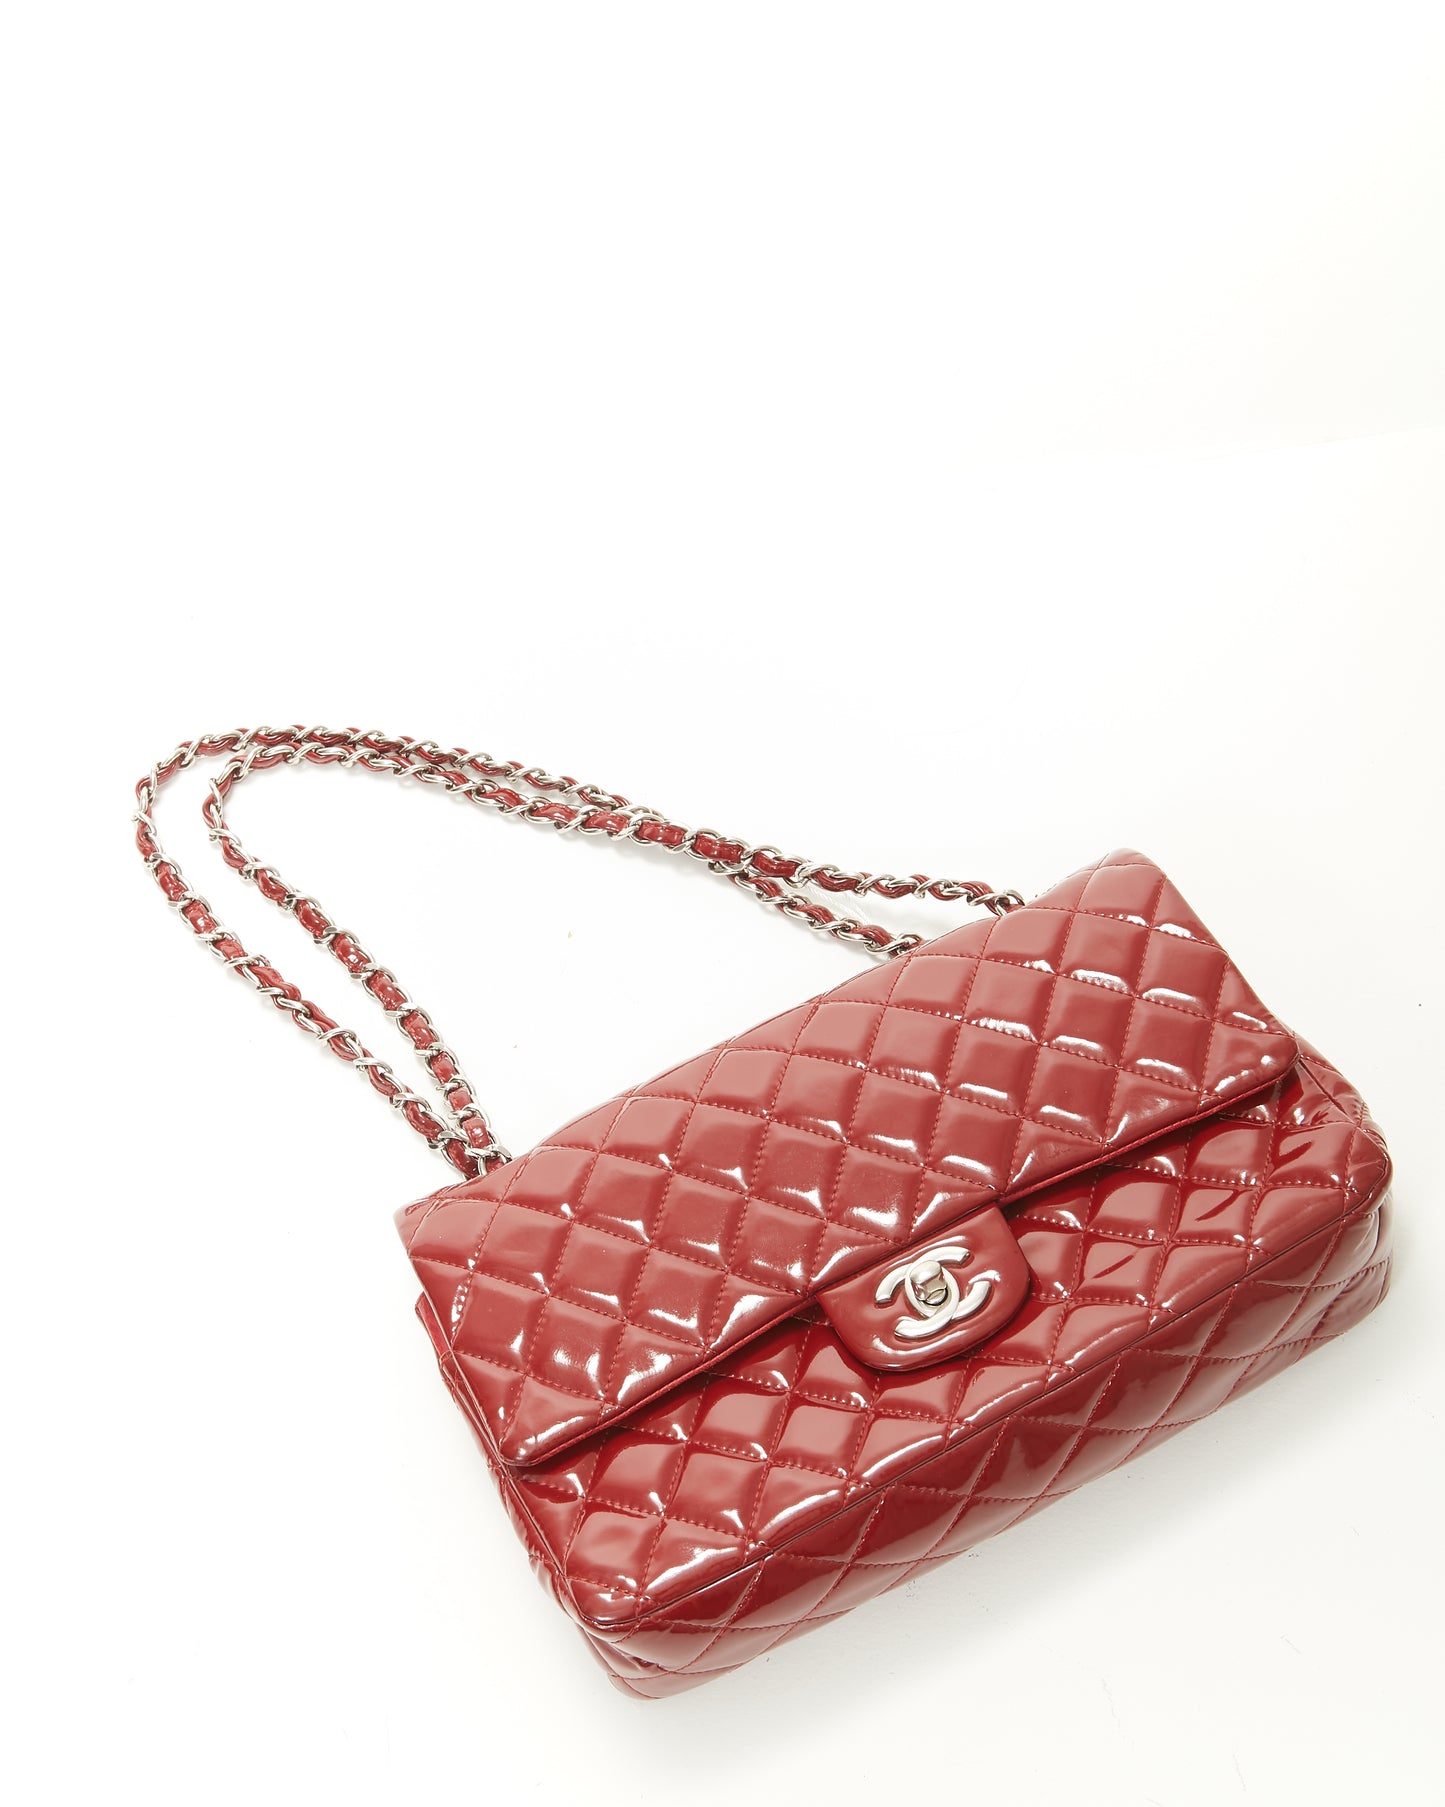 Chanel Red Patent Leather Classic Small Double Flap Bag